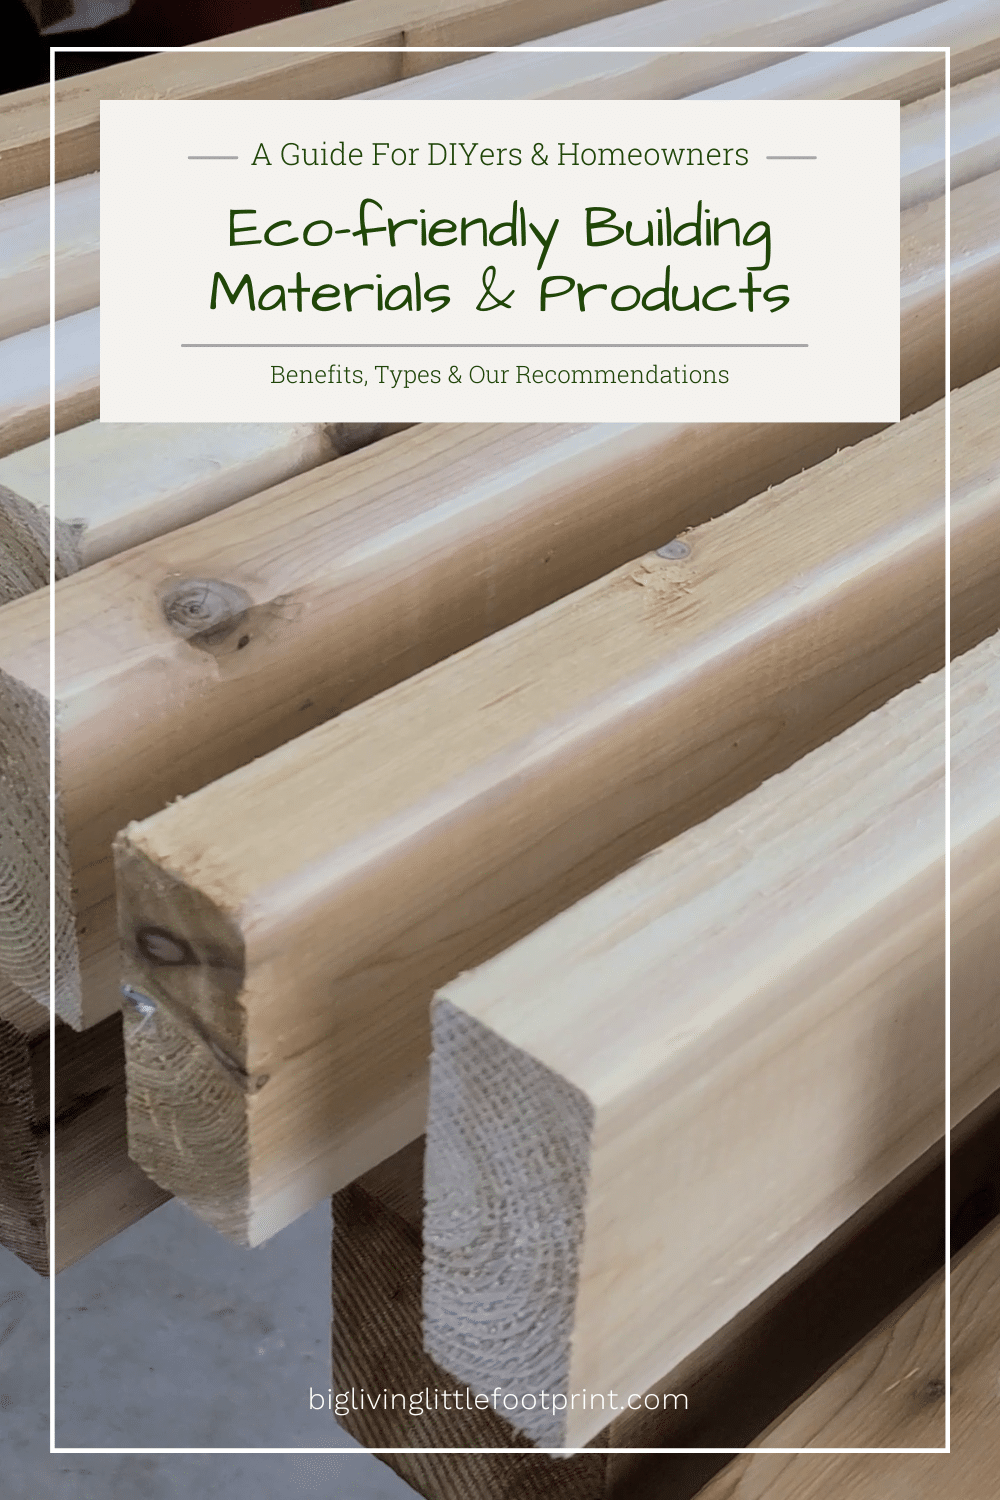 Eco-friendly Building Materials & Products: A Guide For DIYers & Homeowners